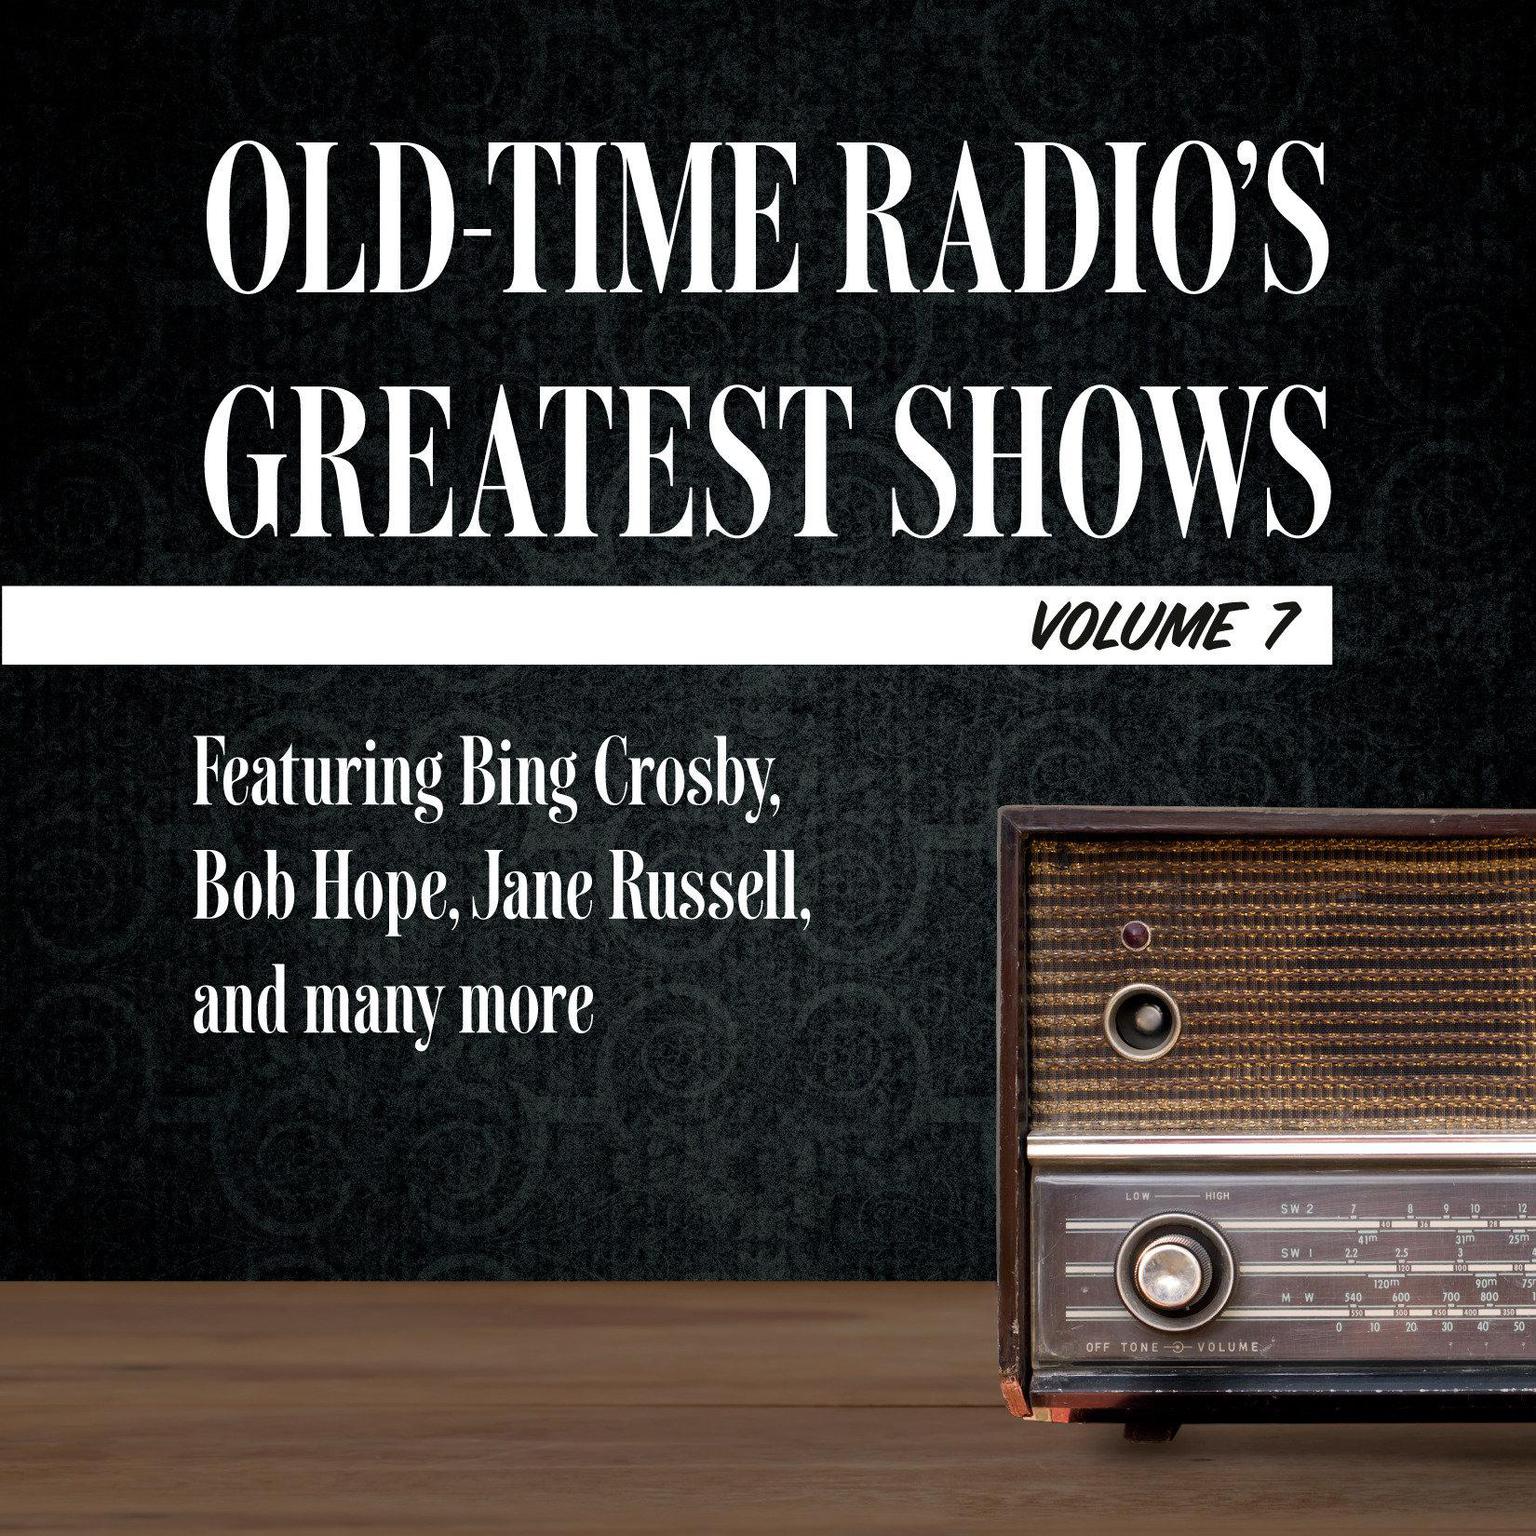 Old-Time Radios Greatest Shows, Volume 7: Featuring Bing Crosby, Bob Hope, Jane Russell, and many more Audiobook, by Carl Amari